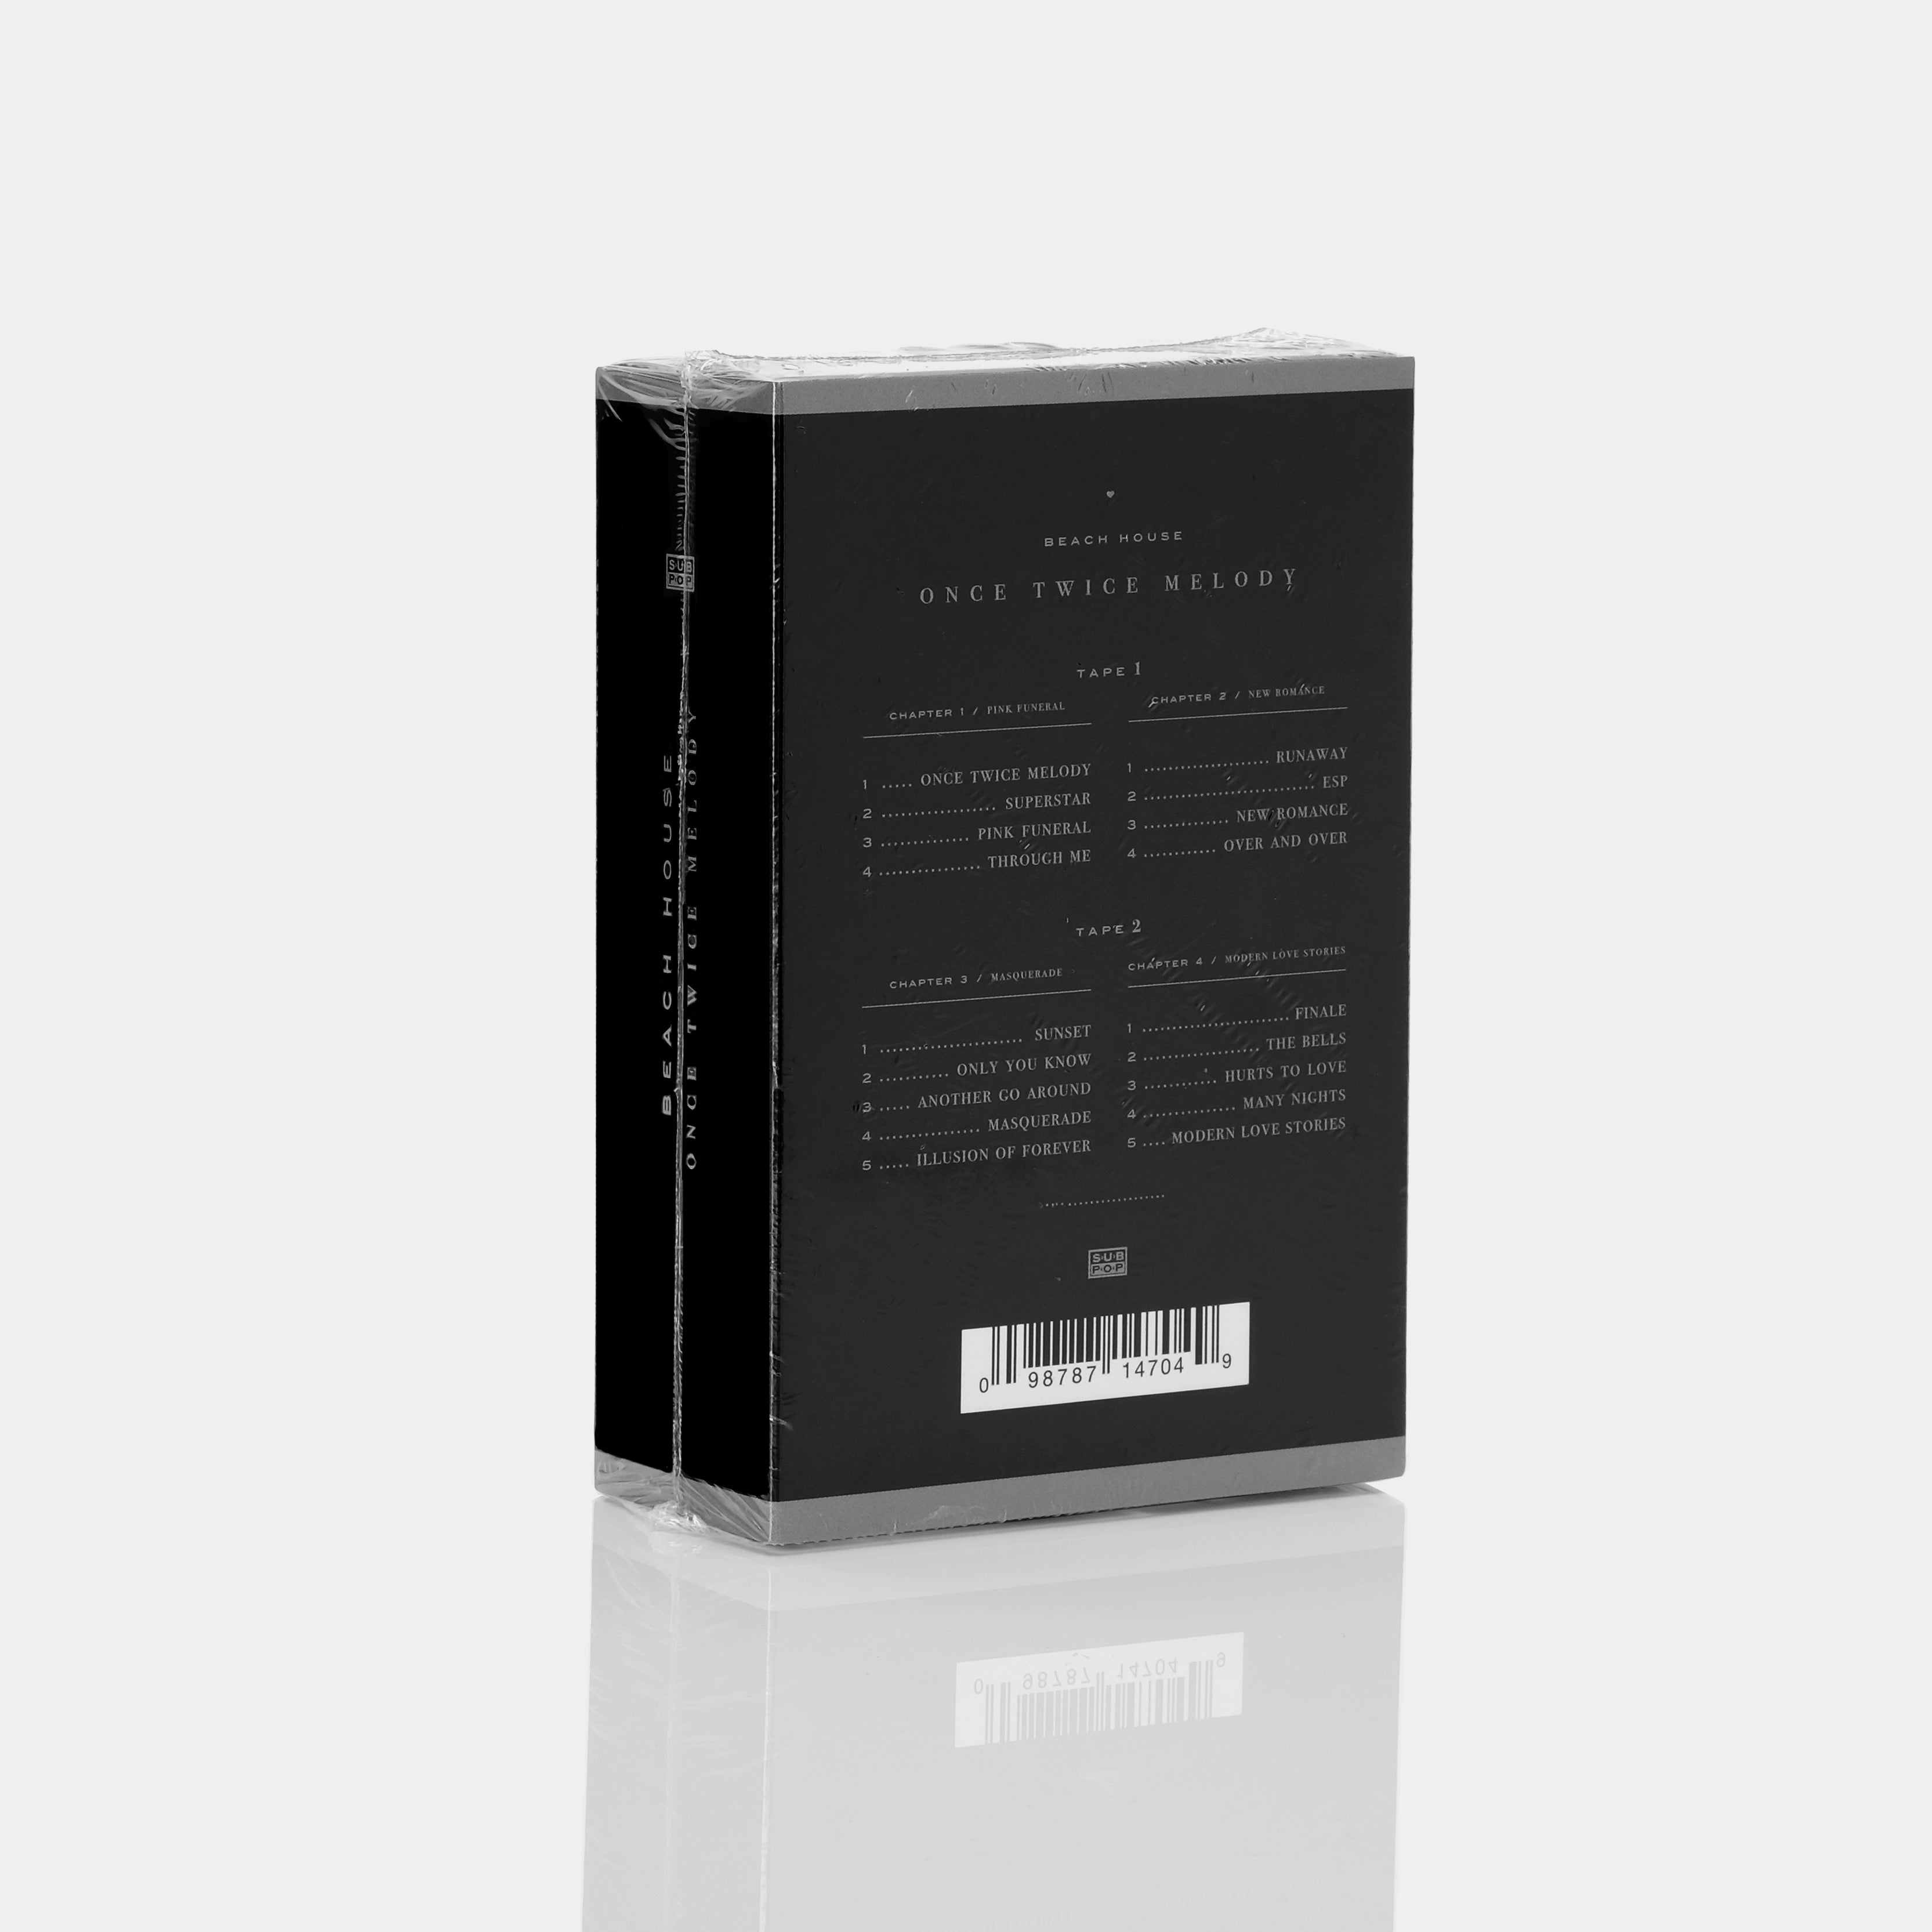 Beach House - Once Twice Melody Cassette Tape Set